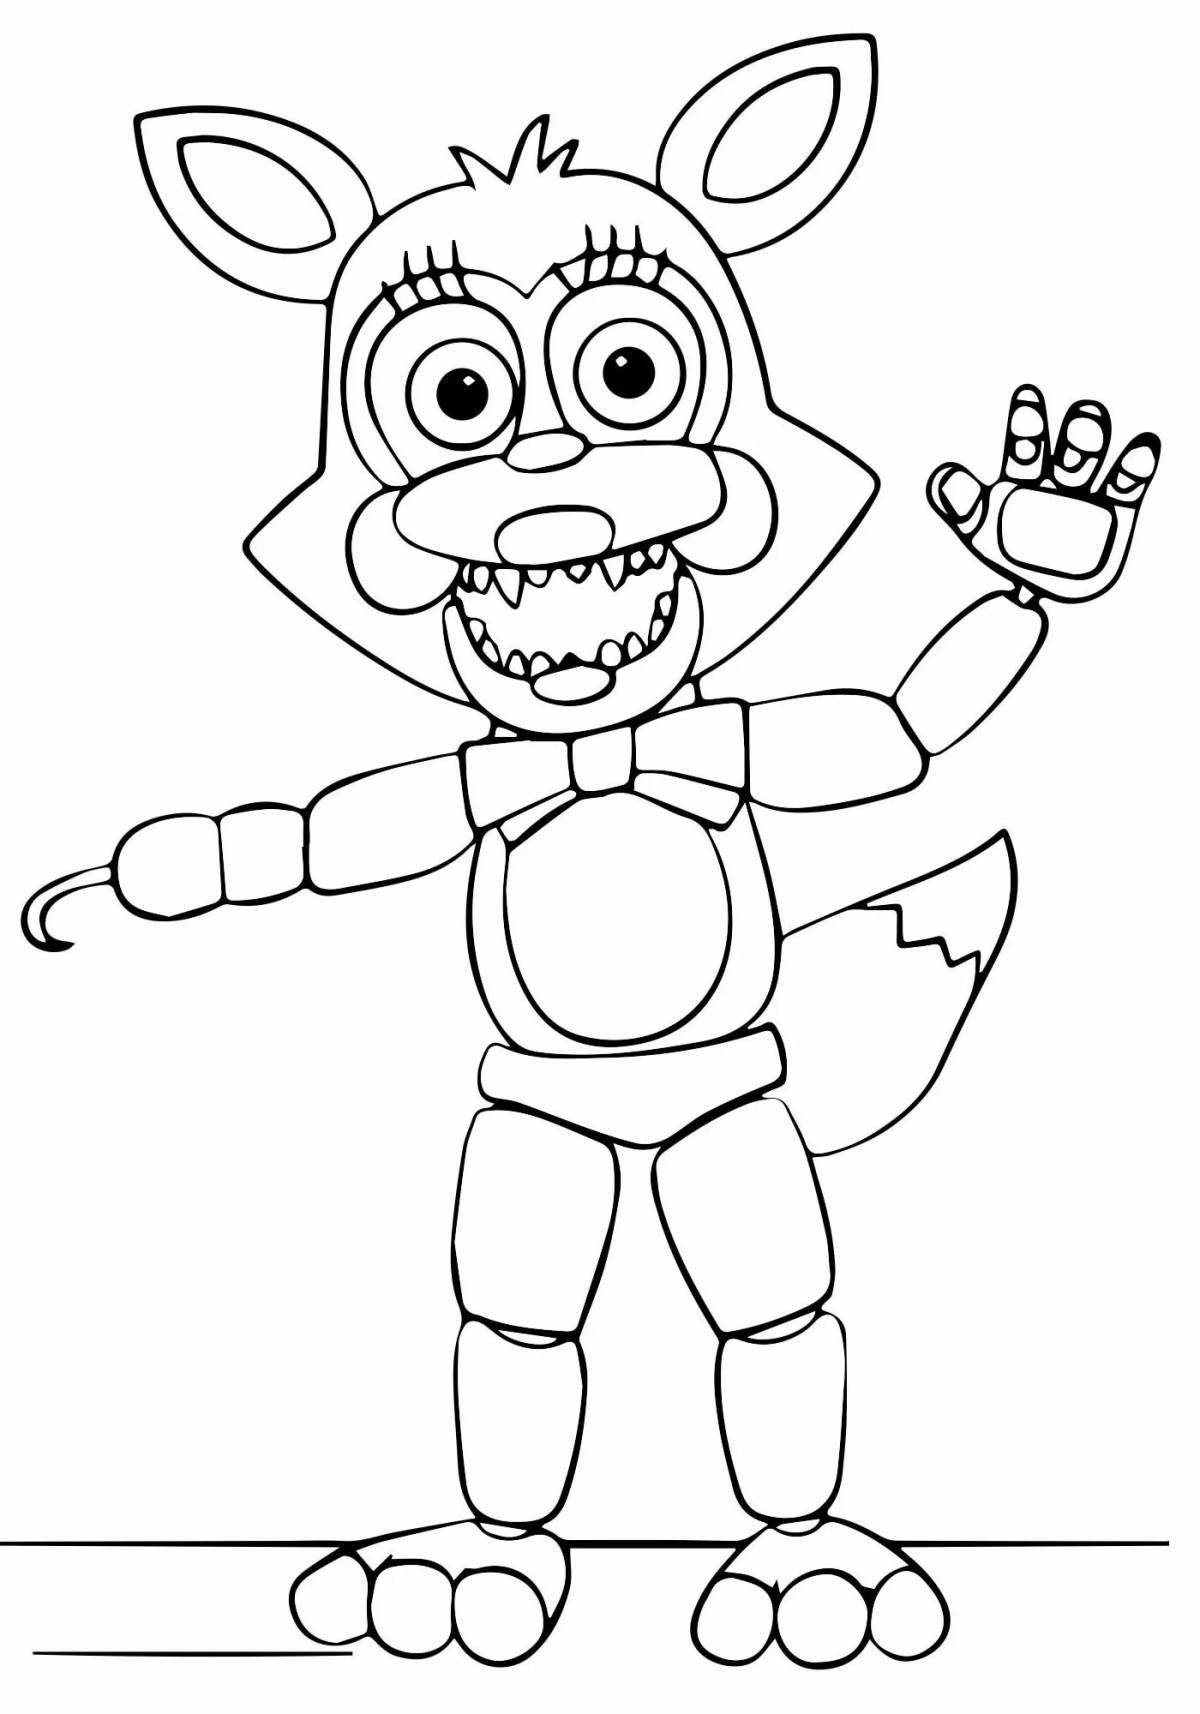 Animated fnaf coloring book for kids